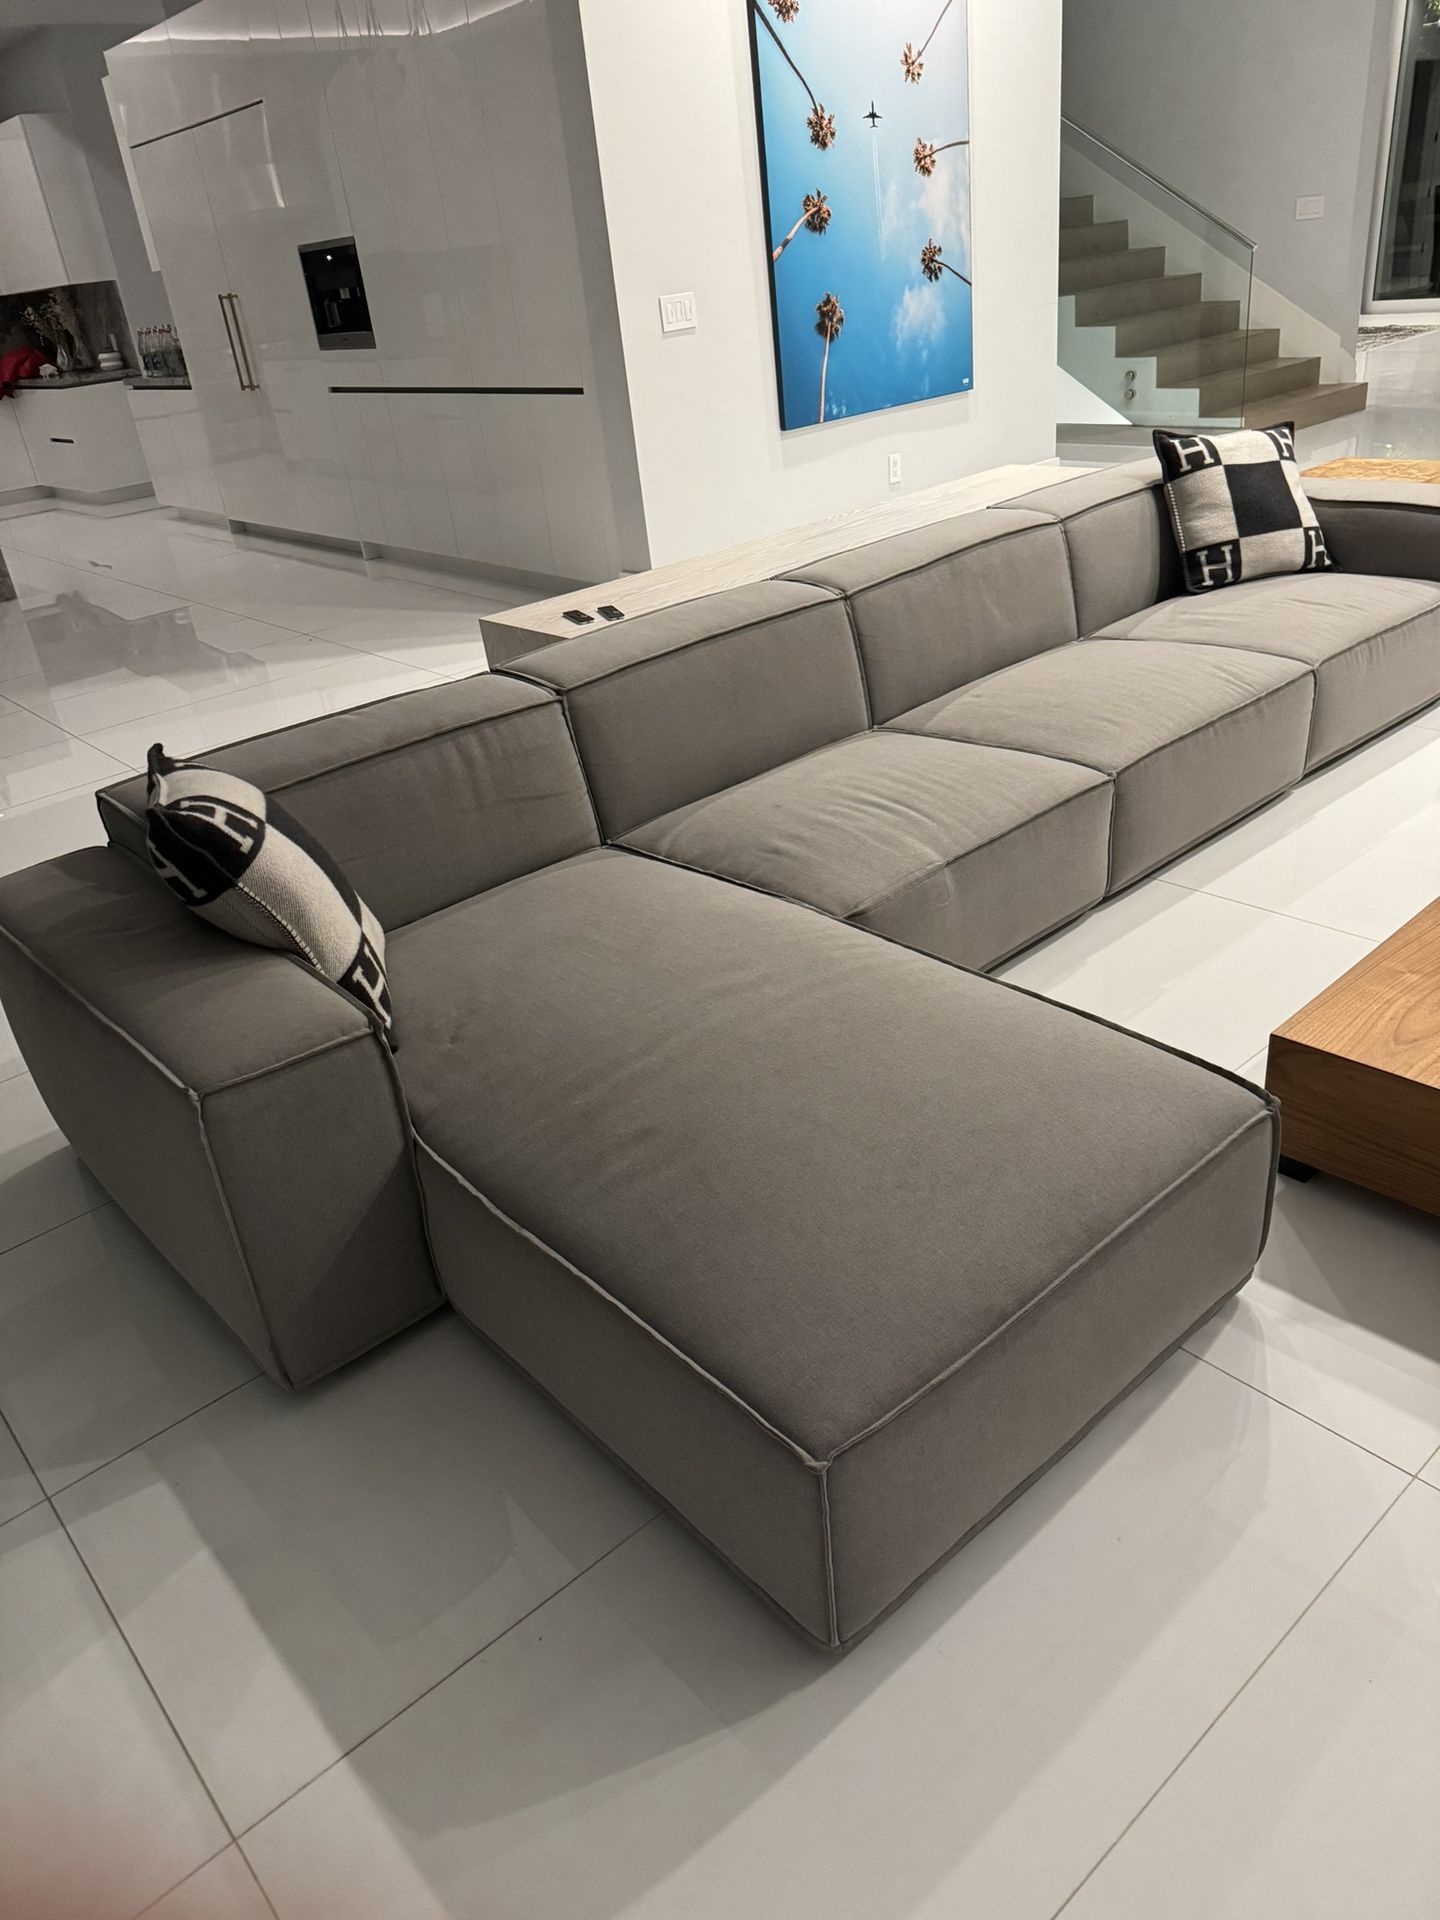 Rove Concepts Porter Extended Sectional Sofa